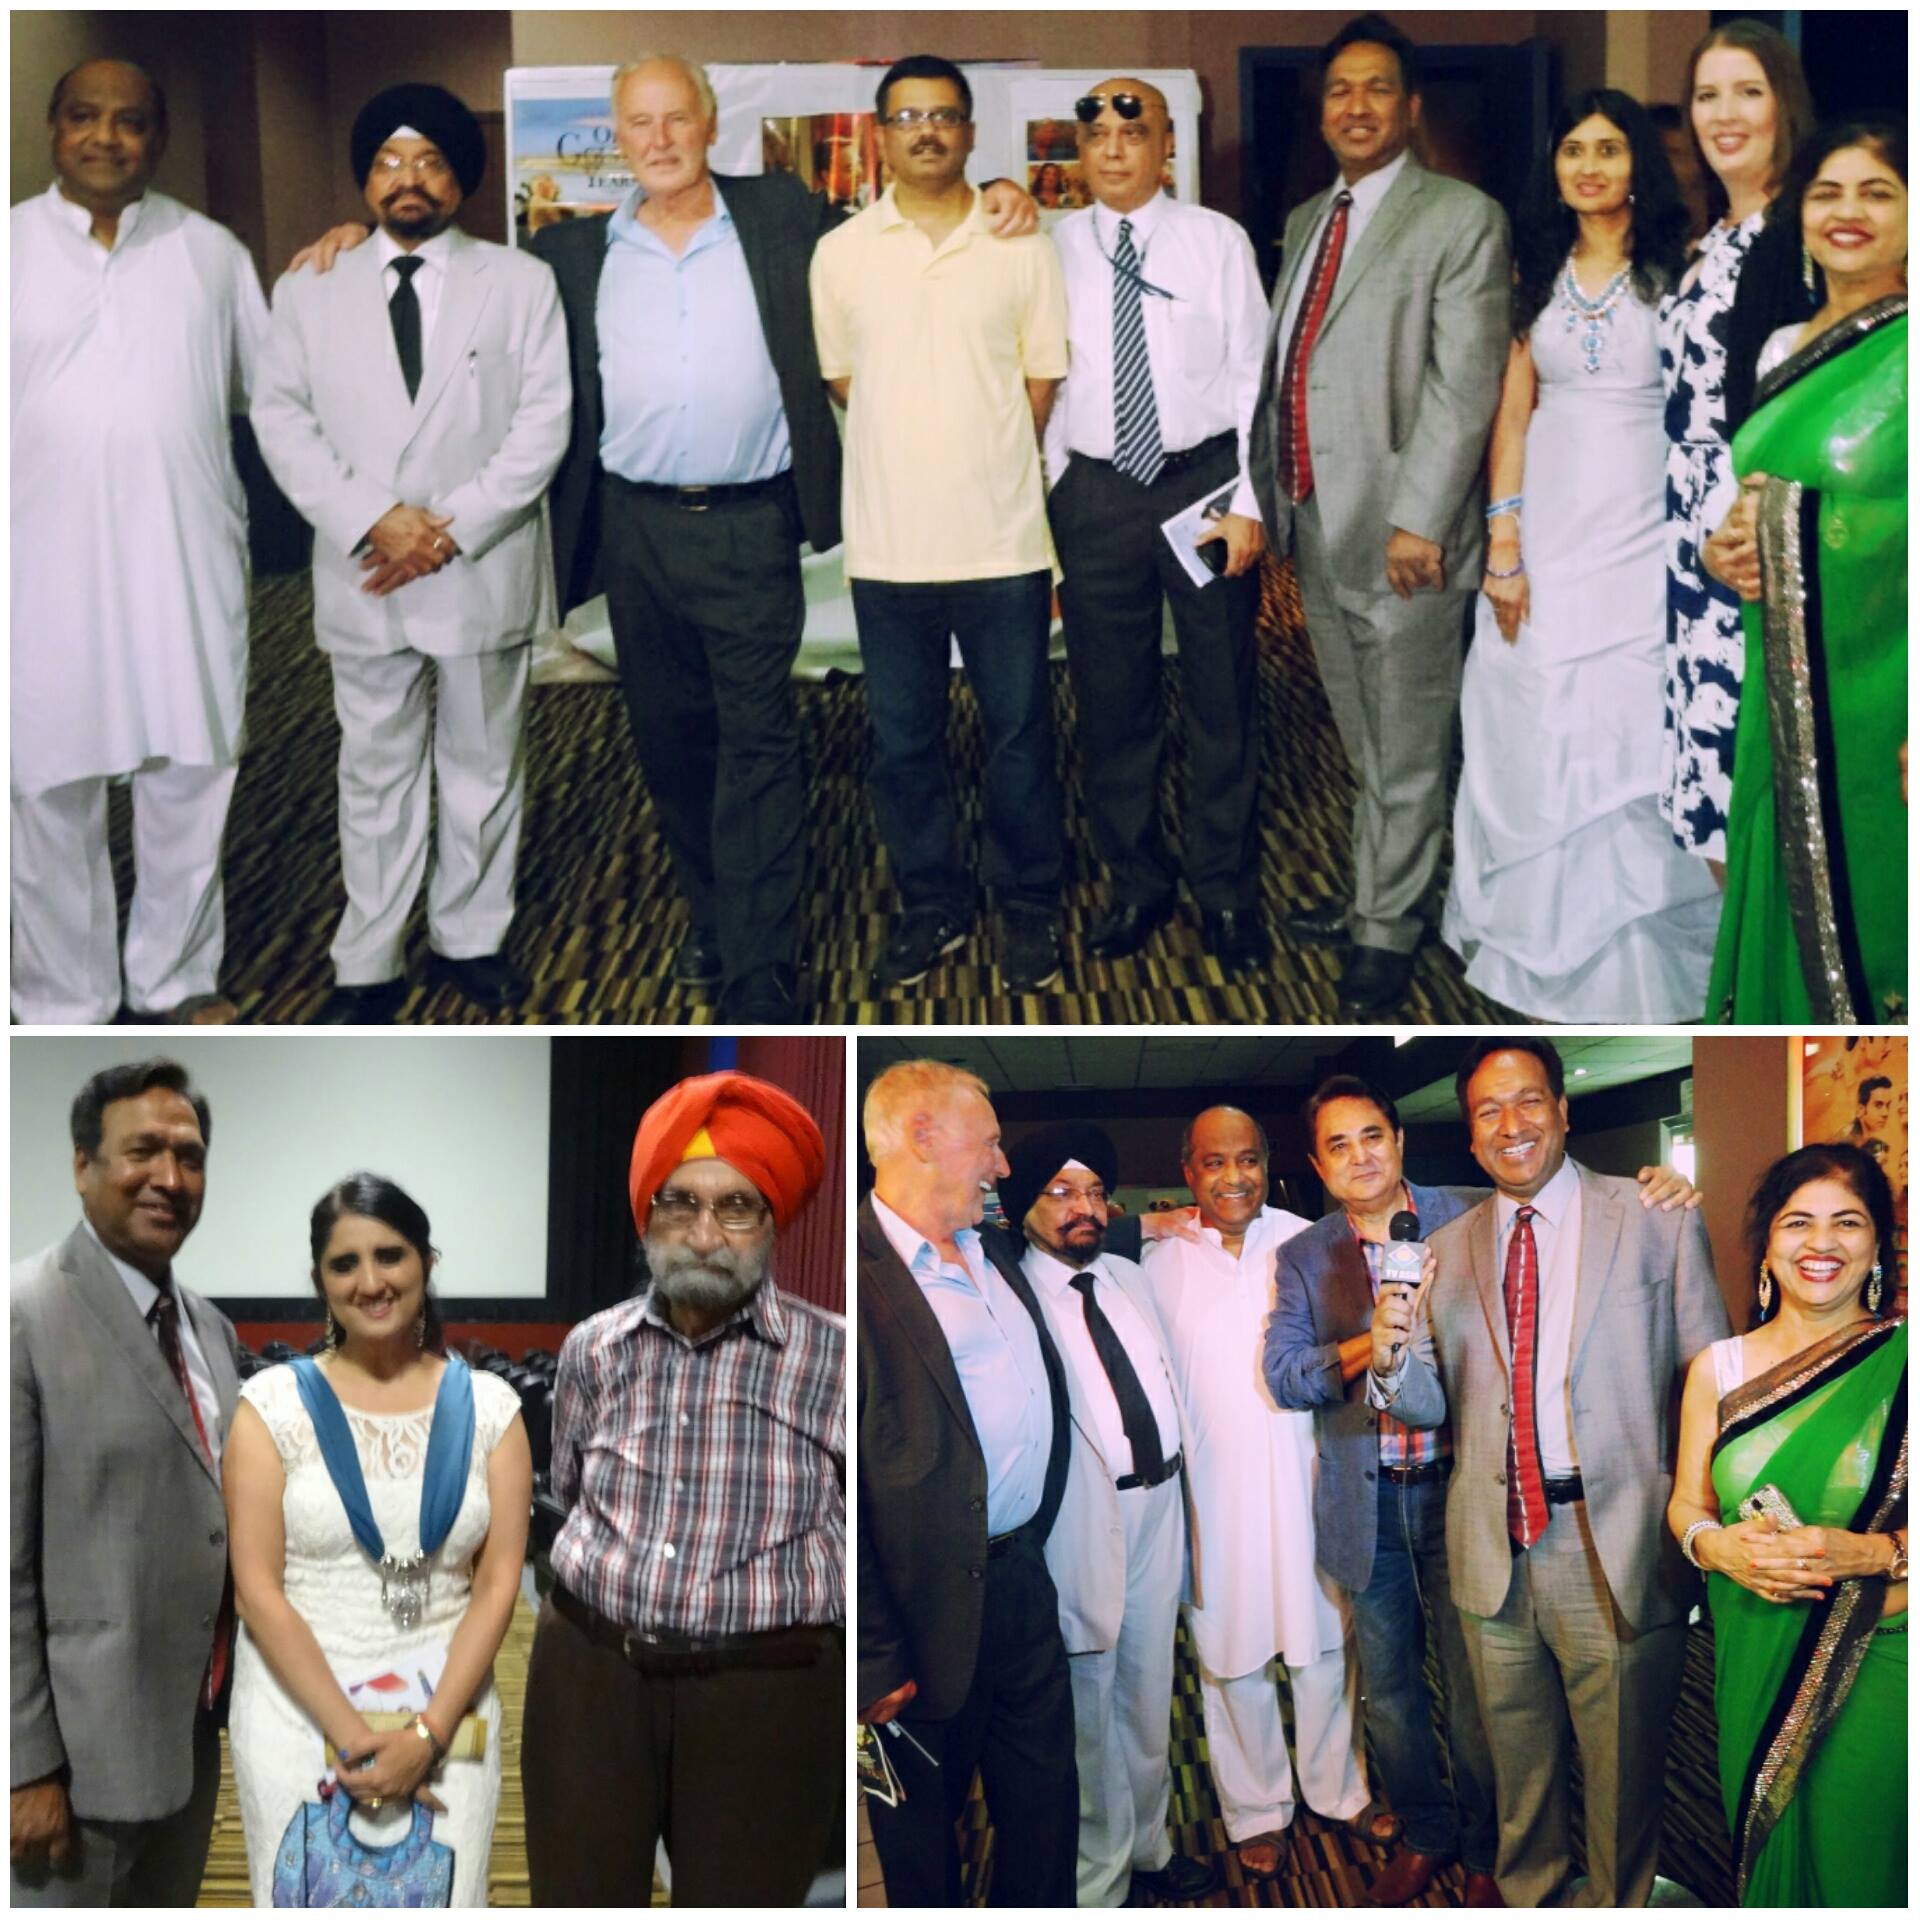 At the Washington area premiere of the film, 'On Golden Years' , Sunday, July 19, 2015. Top L to R: Producer Iggy Ignatius, actor Indrajit Singh Saluja, actor Reeves Lehmann, Journalists Lalit Jha and Tejinder Singh, Director Tirlok Malik, Gauri Singh Puri, Makeup artist Christina Smith, and actress Indu Gajwani. Below left: Actress Jyoti Singh is flanked by director Tirlok Malik (left) and her father Mr. Manmohan Singh Puri. Below right, from L to R: Reeves Lehmann, Professor Indrajit Singh Saluja, Iggy Ignatius, Noor Naghmi, Tirlok Malik and Indu Gajwani